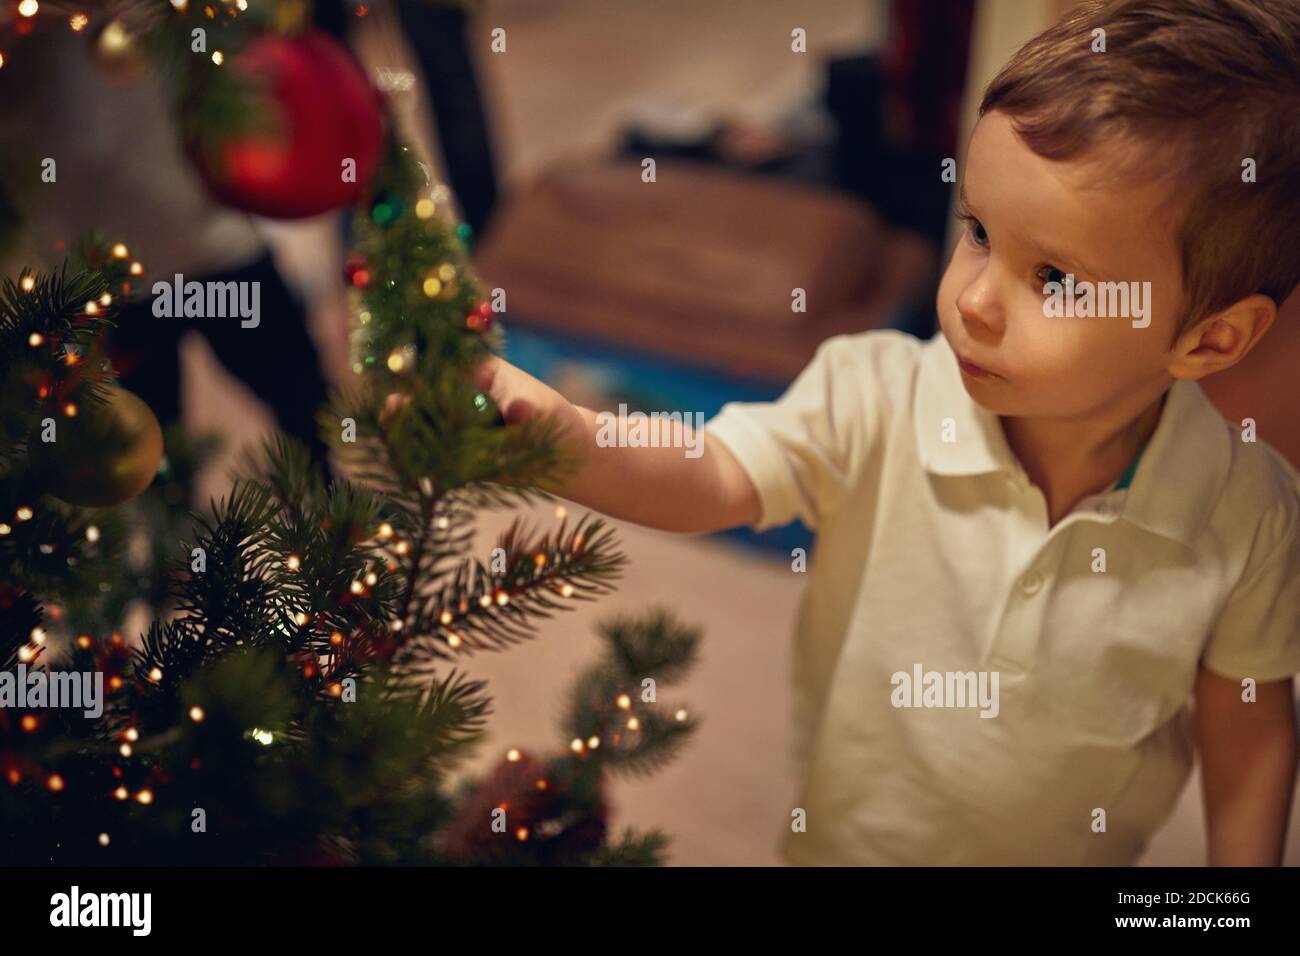 A cute little kid watching ornaments on a Christmas tree in a holiday atmosphere at home. Together, New Year, family, celebration Stock Photo